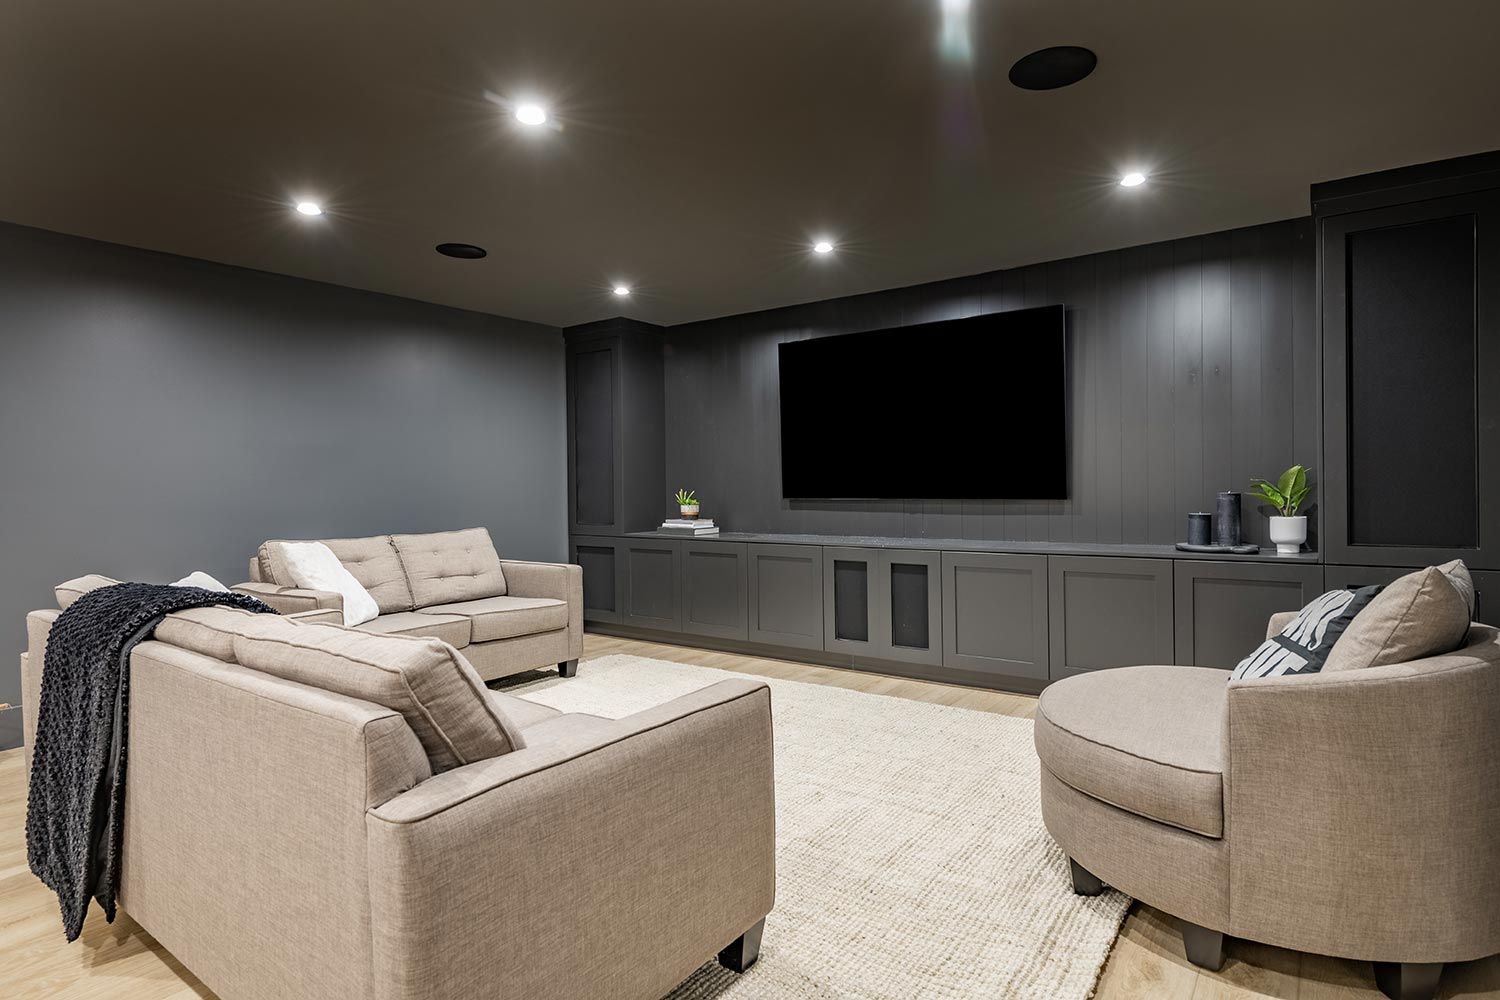 Media Room with grey and natural colors